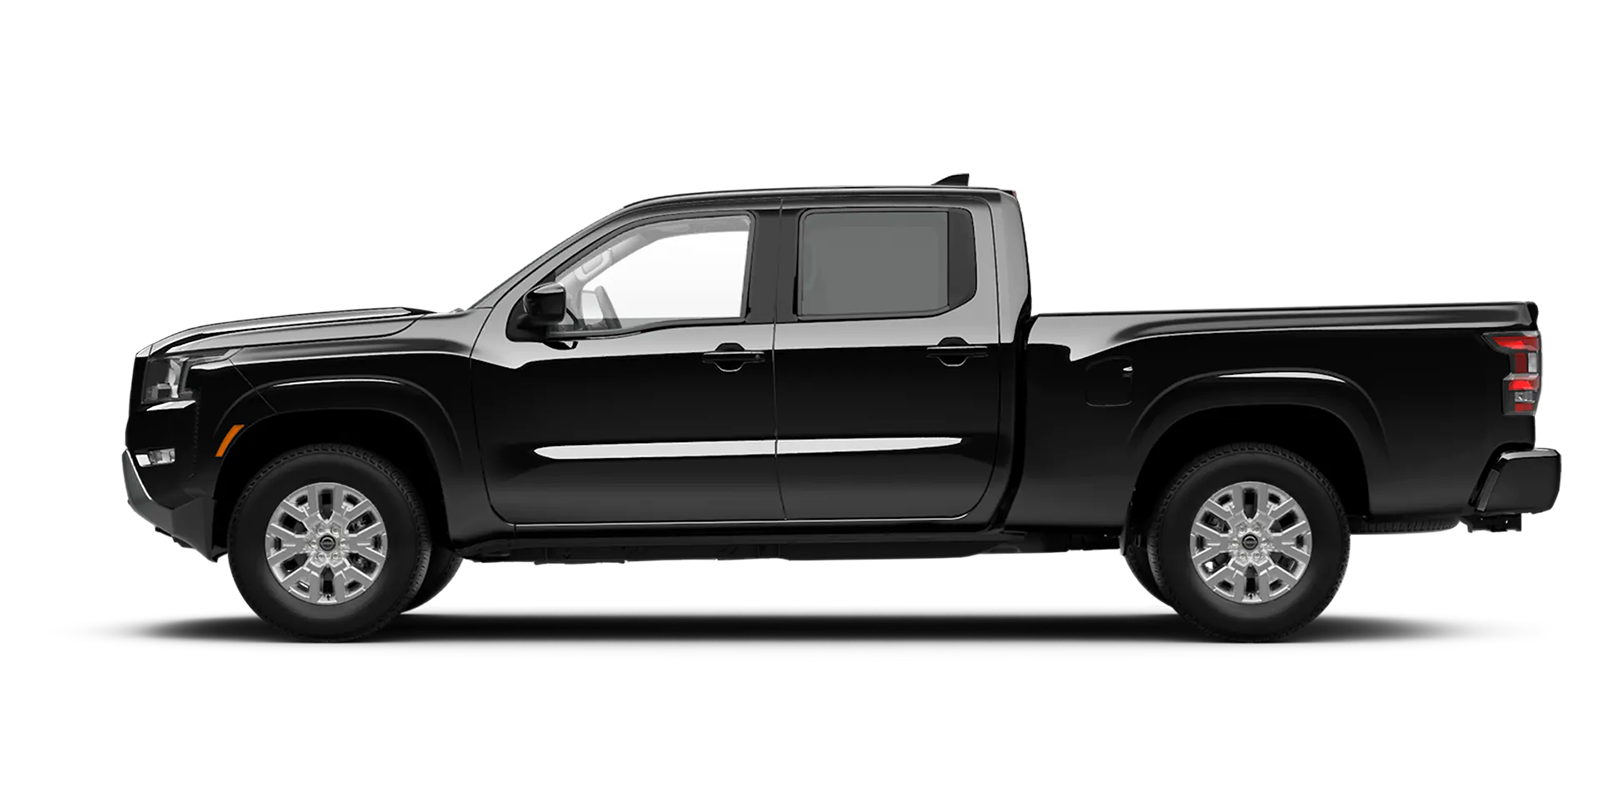 2022 Frontier Crew Cab Long Bed SV 4x4 in Super Black | Cherokee County Nissan in Holly Springs GA